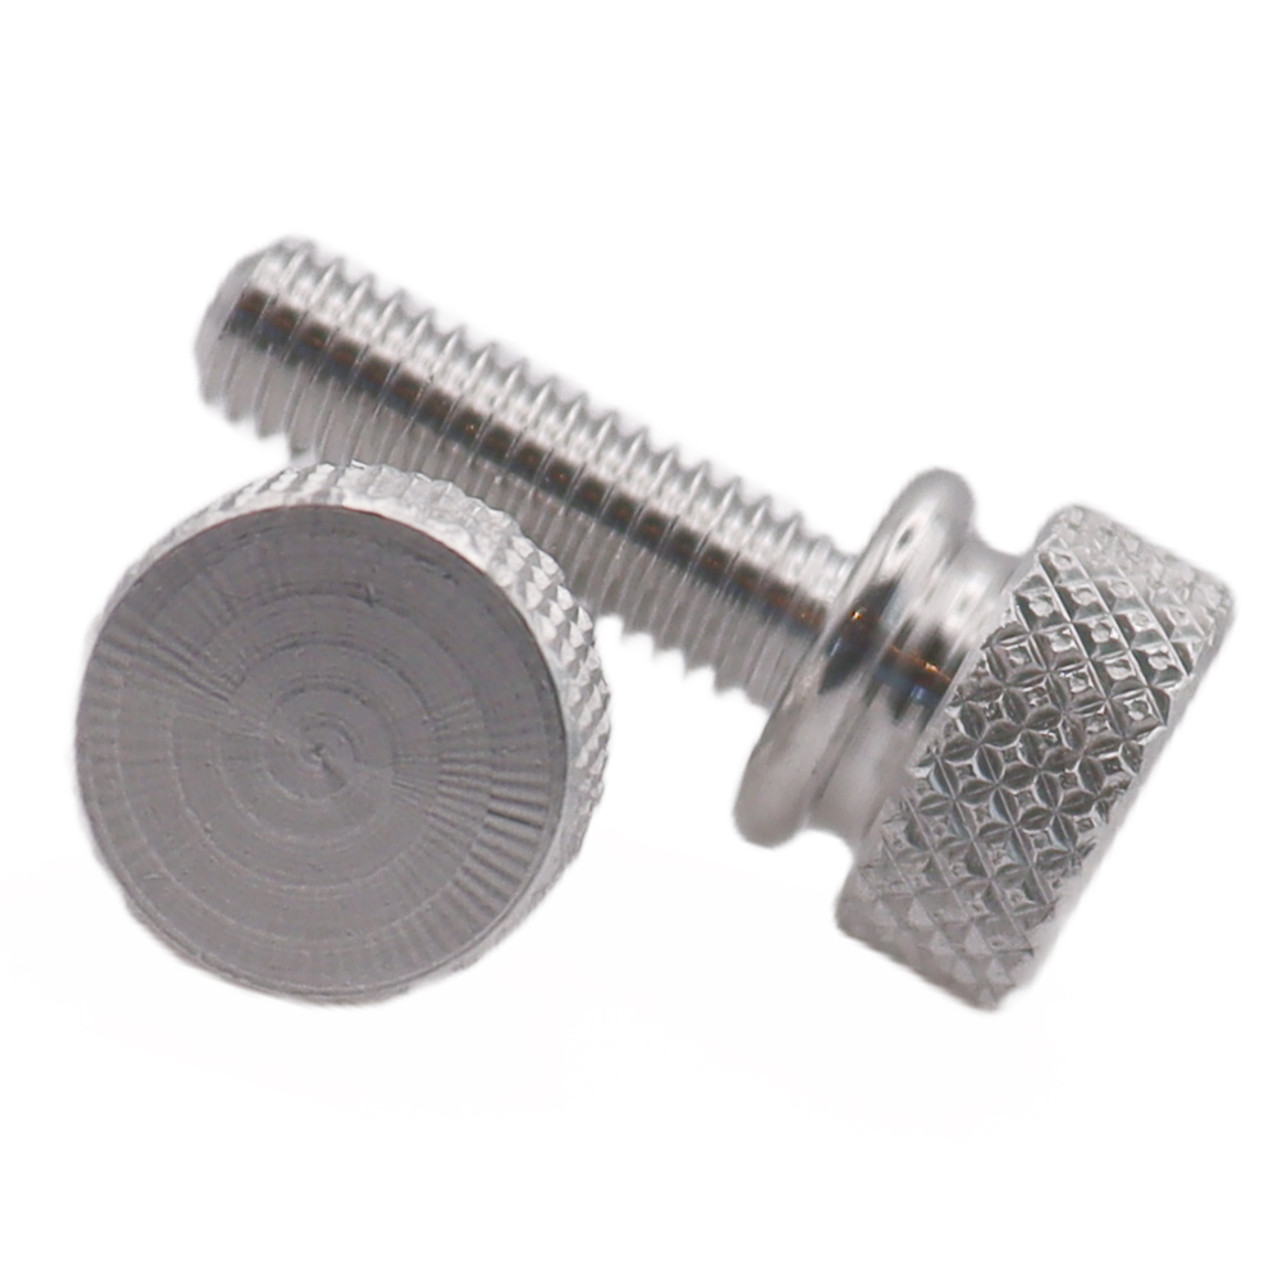 #4-40 x 7/16" (FT) Coarse Thread Knurled Thumb Screw with Washer Face Aluminum